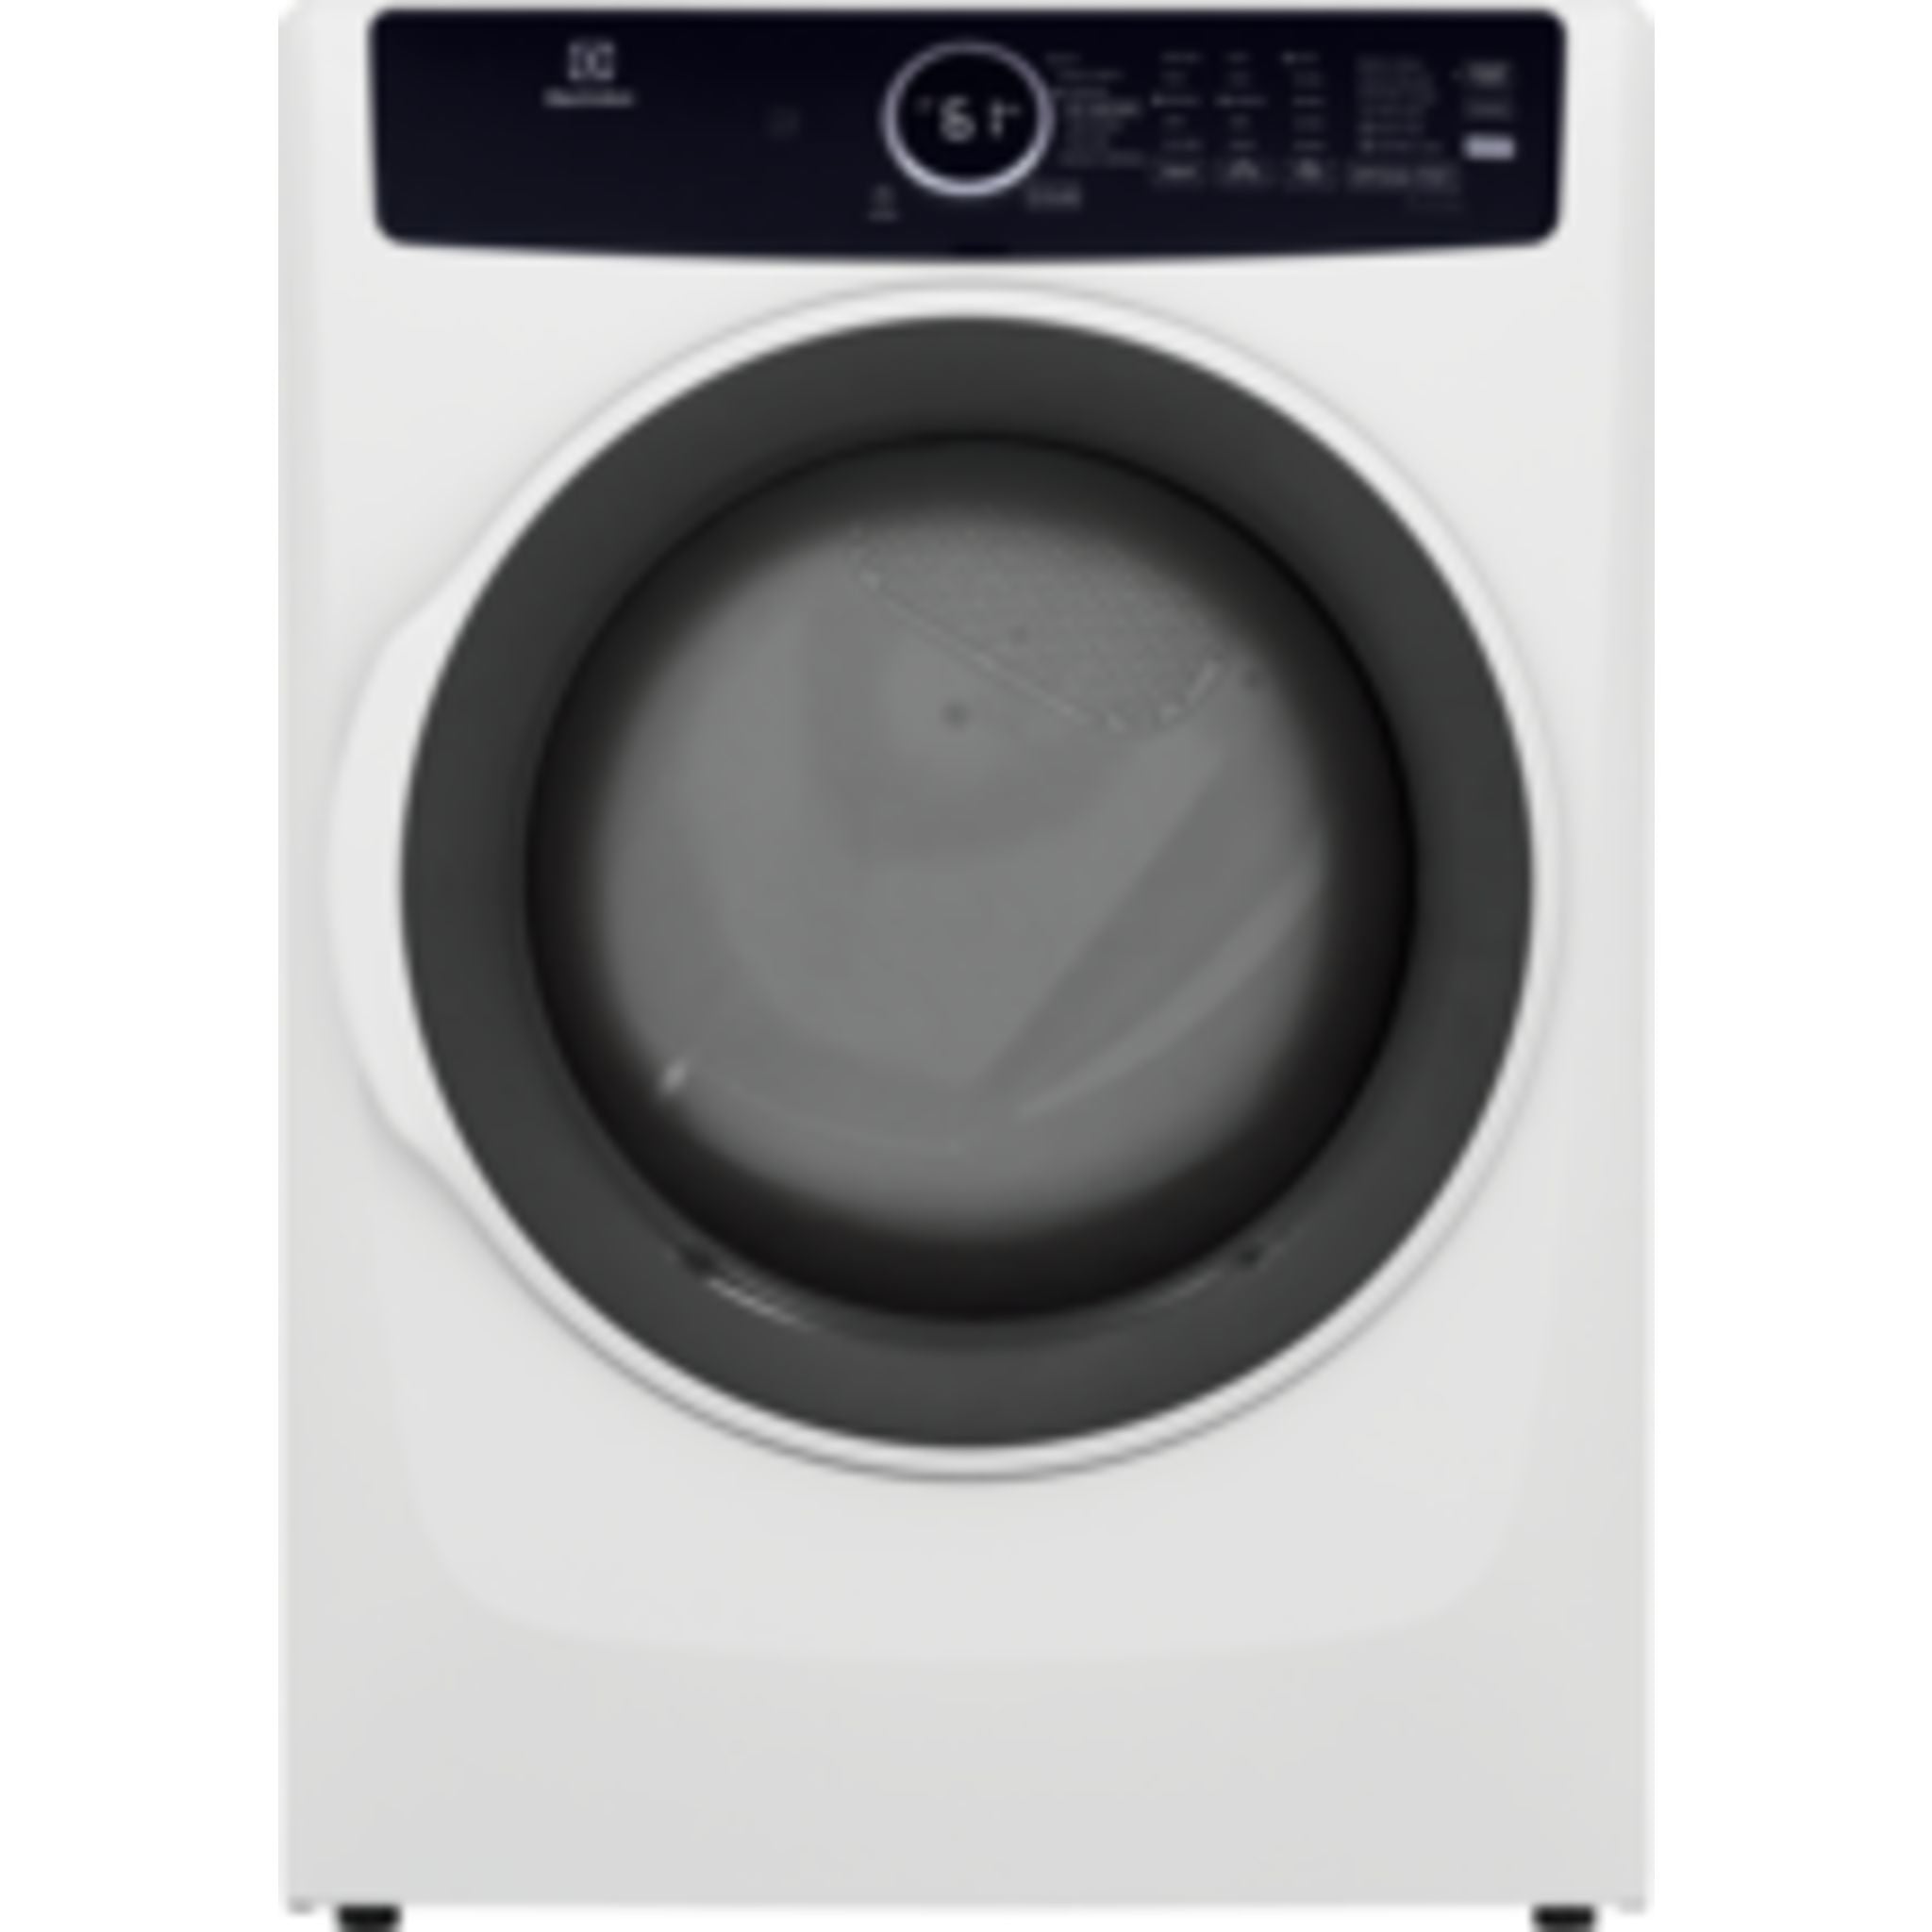 Electrolux Home Products, Electrolux Gas Dryer (ELFG7437AW) - White